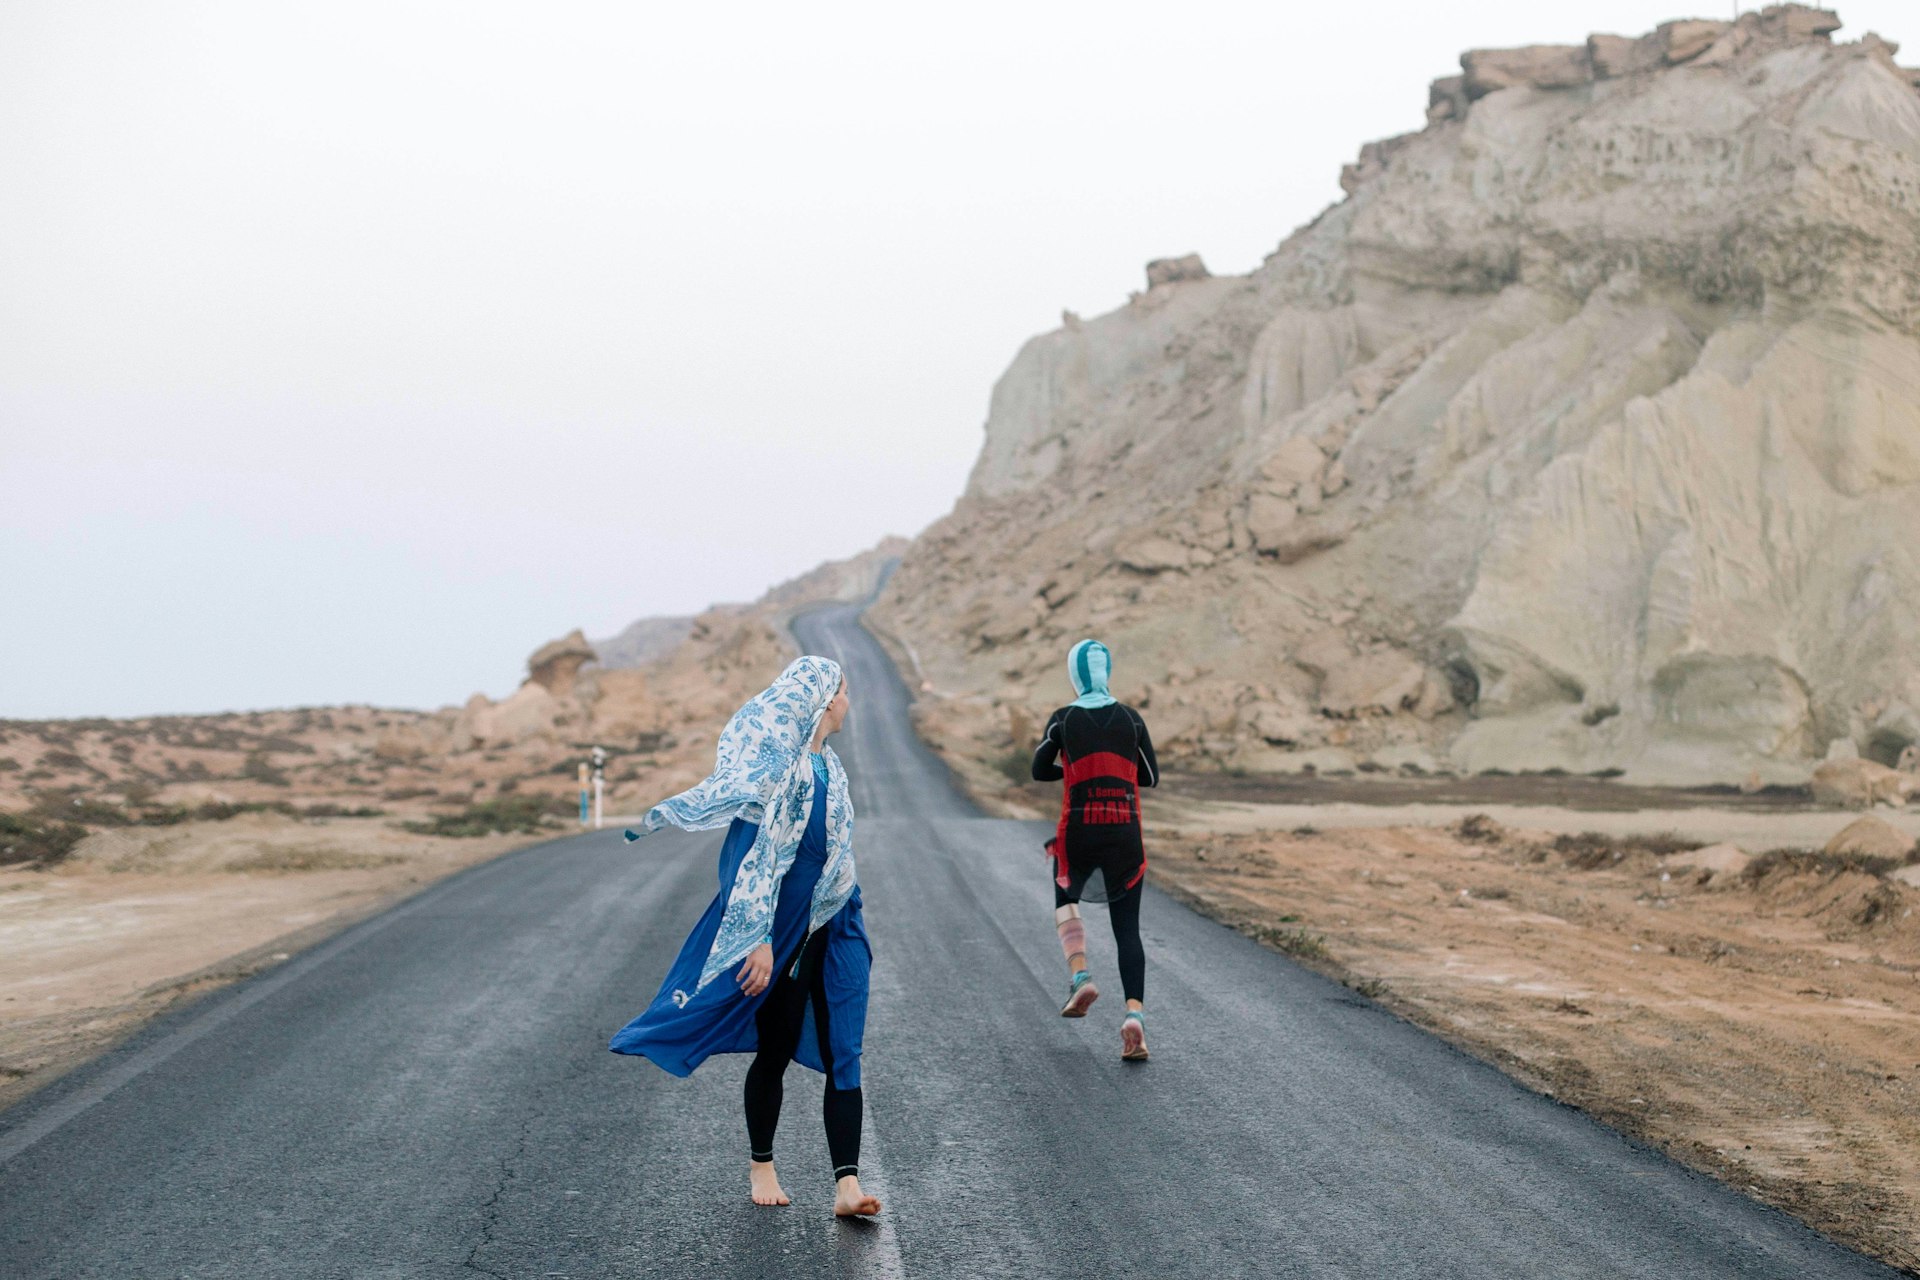 The pioneering female Iranian athlete taking on the world's toughest race